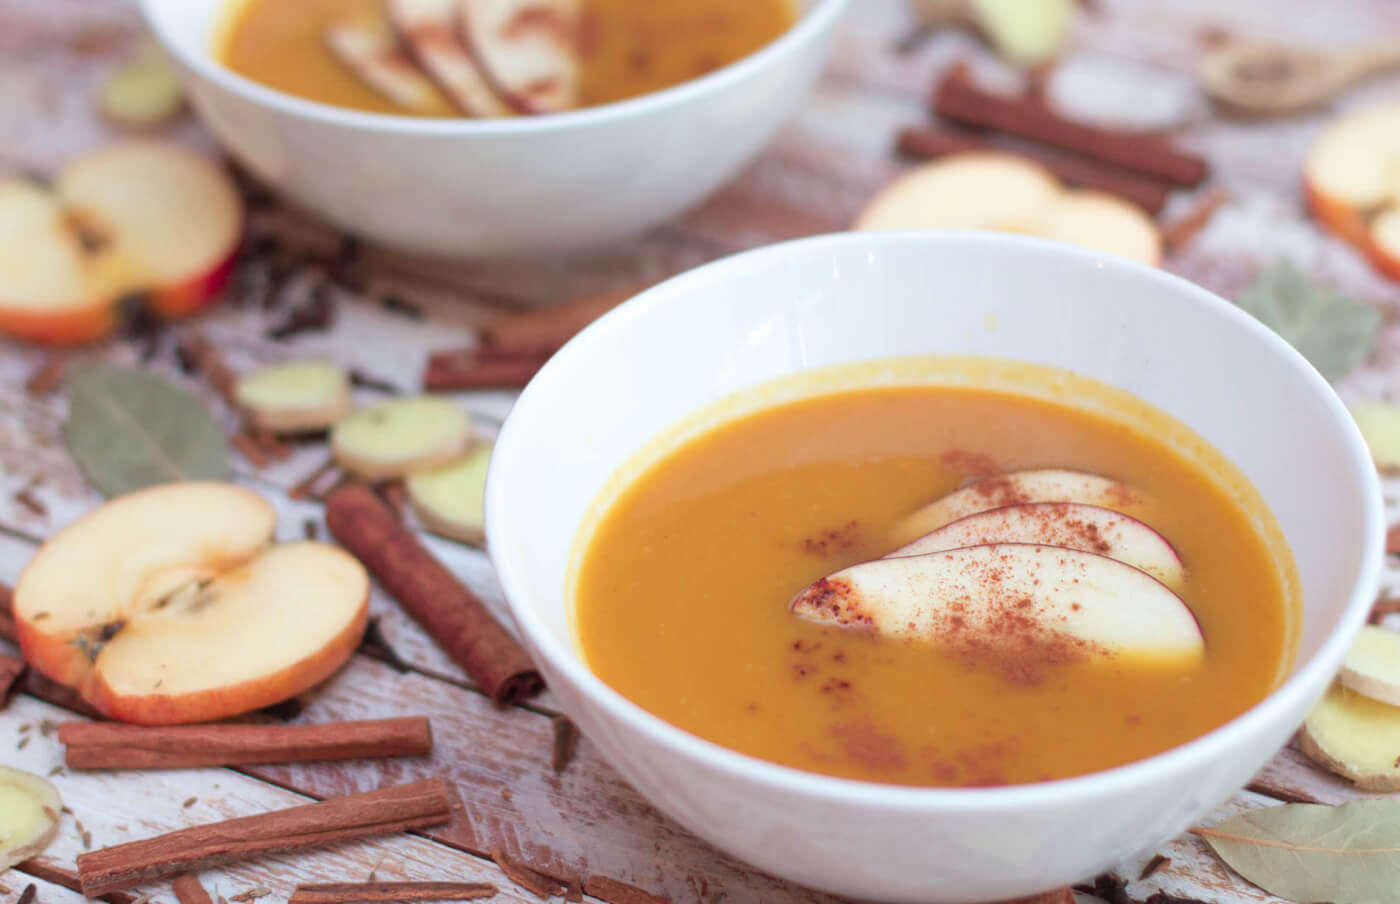 Roasted Apple and Squash Soup